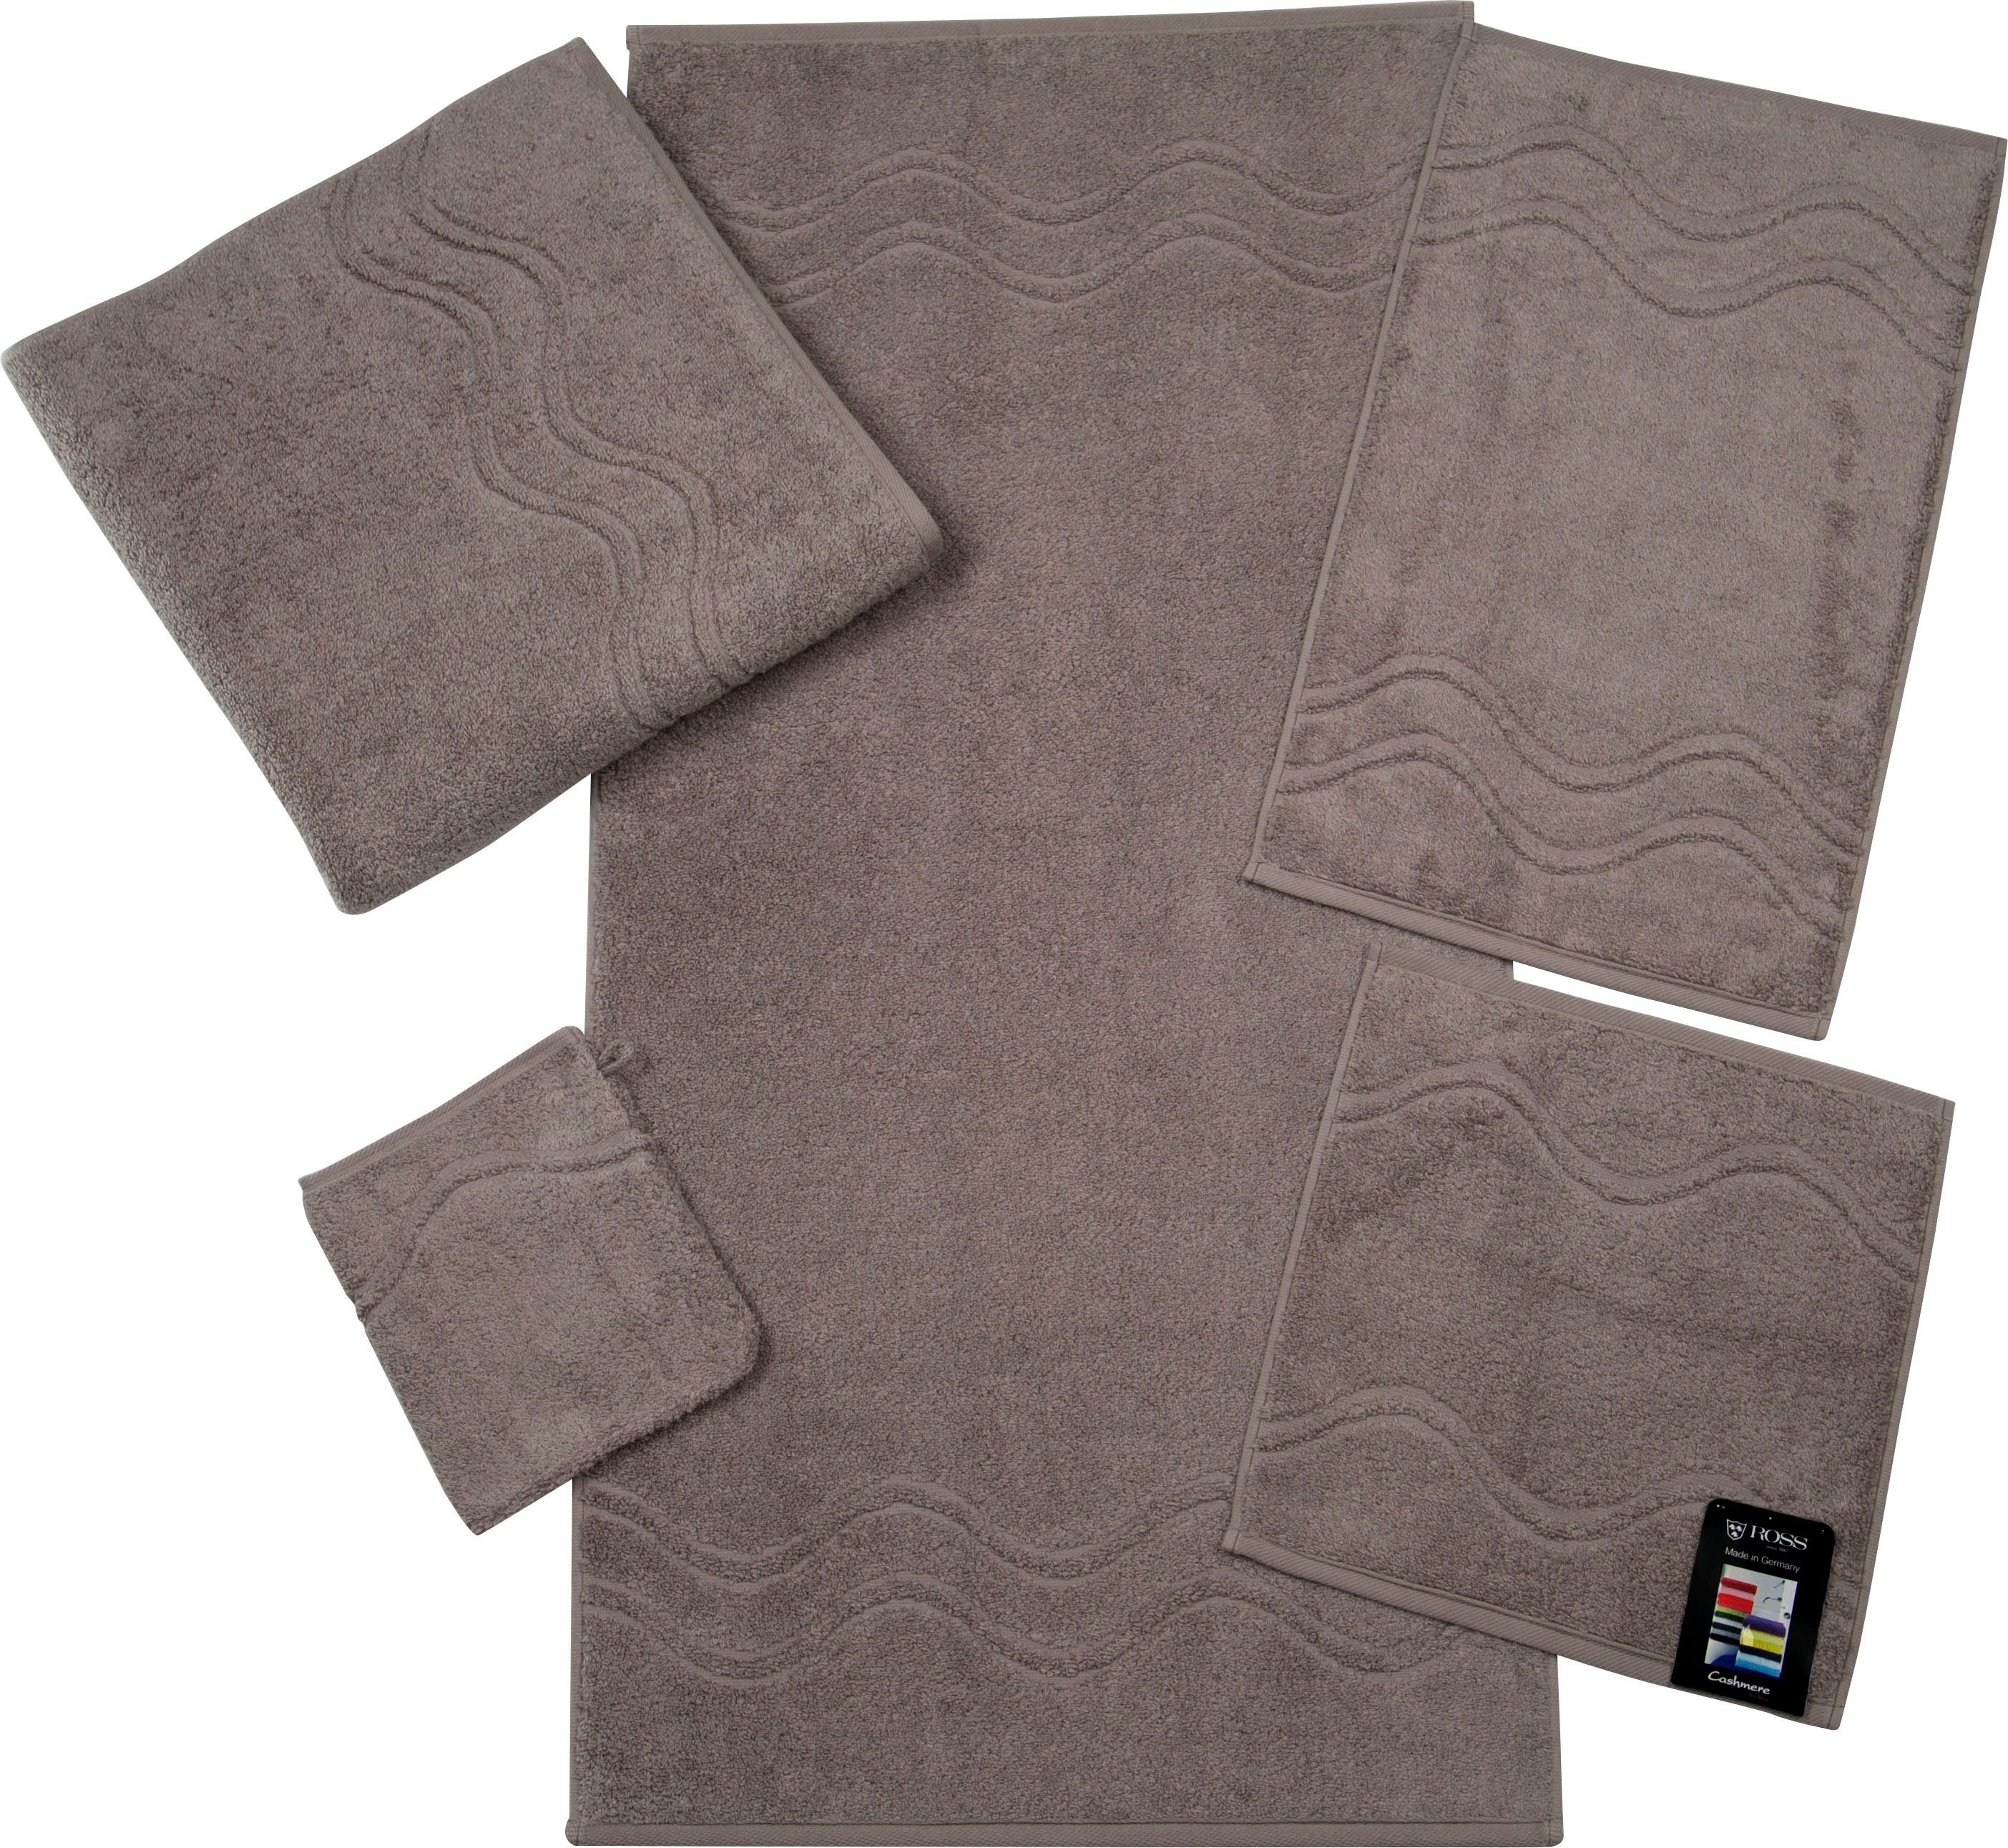 ROSS Seiftuch Cashmere feeling (6-tlg), mit Wellen-Bordüre flanell